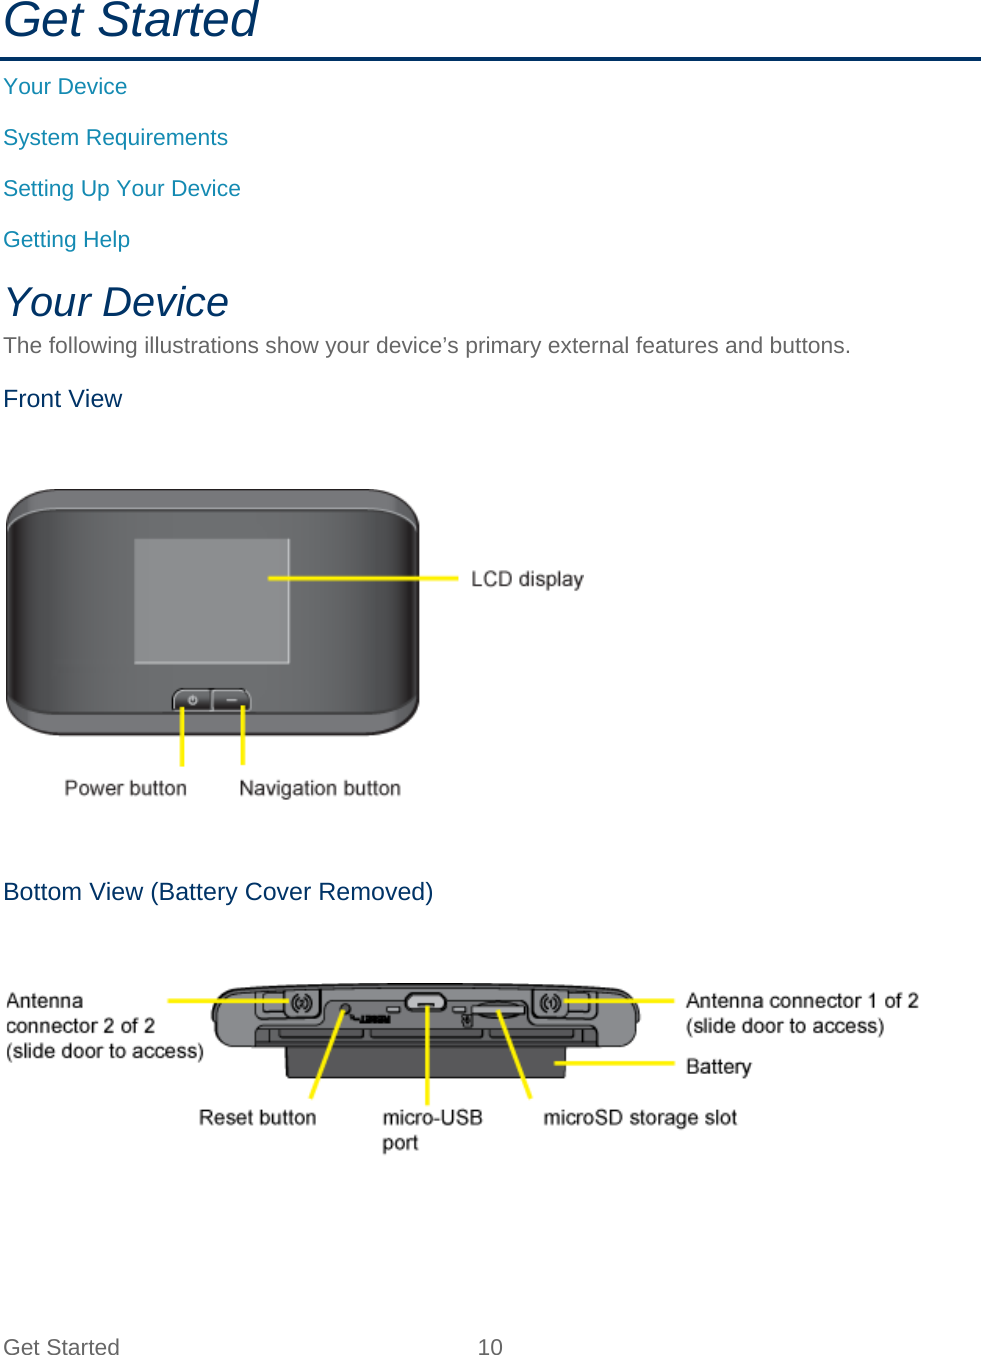 Get Started 10   Get Started Your Device System Requirements Setting Up Your Device Getting Help Your Device The following illustrations show your device’s primary external features and buttons. Front View    Bottom View (Battery Cover Removed)    